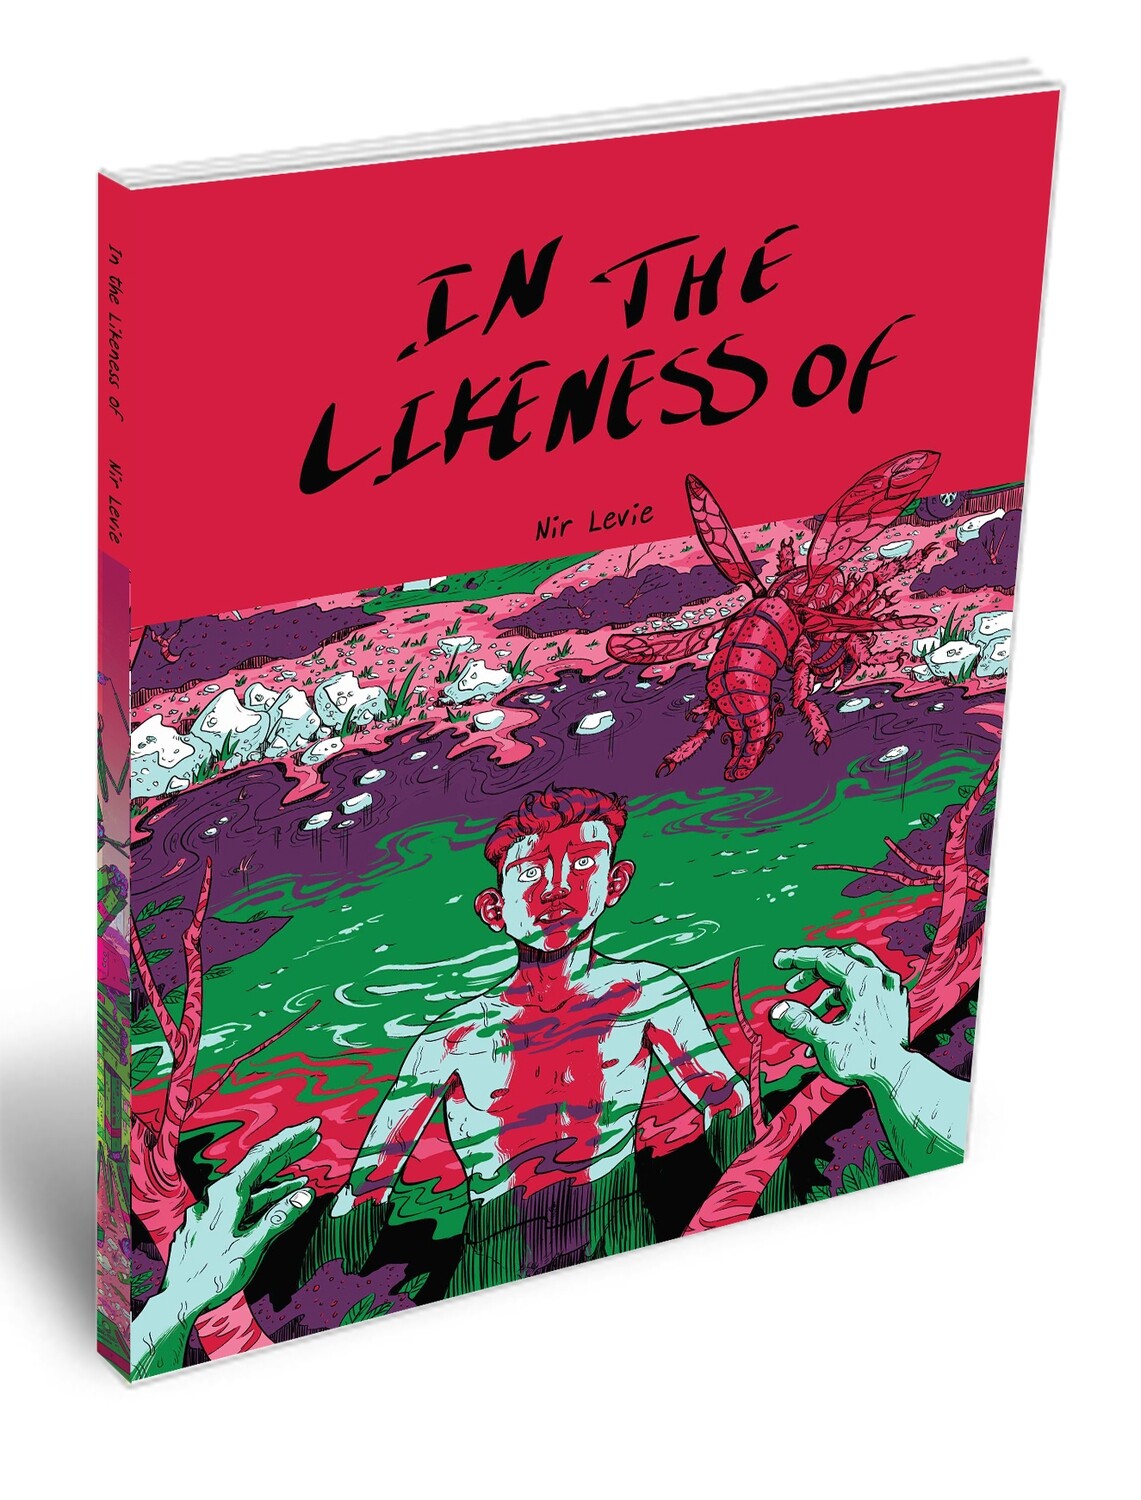 In the Likeness of - a collection of short stories